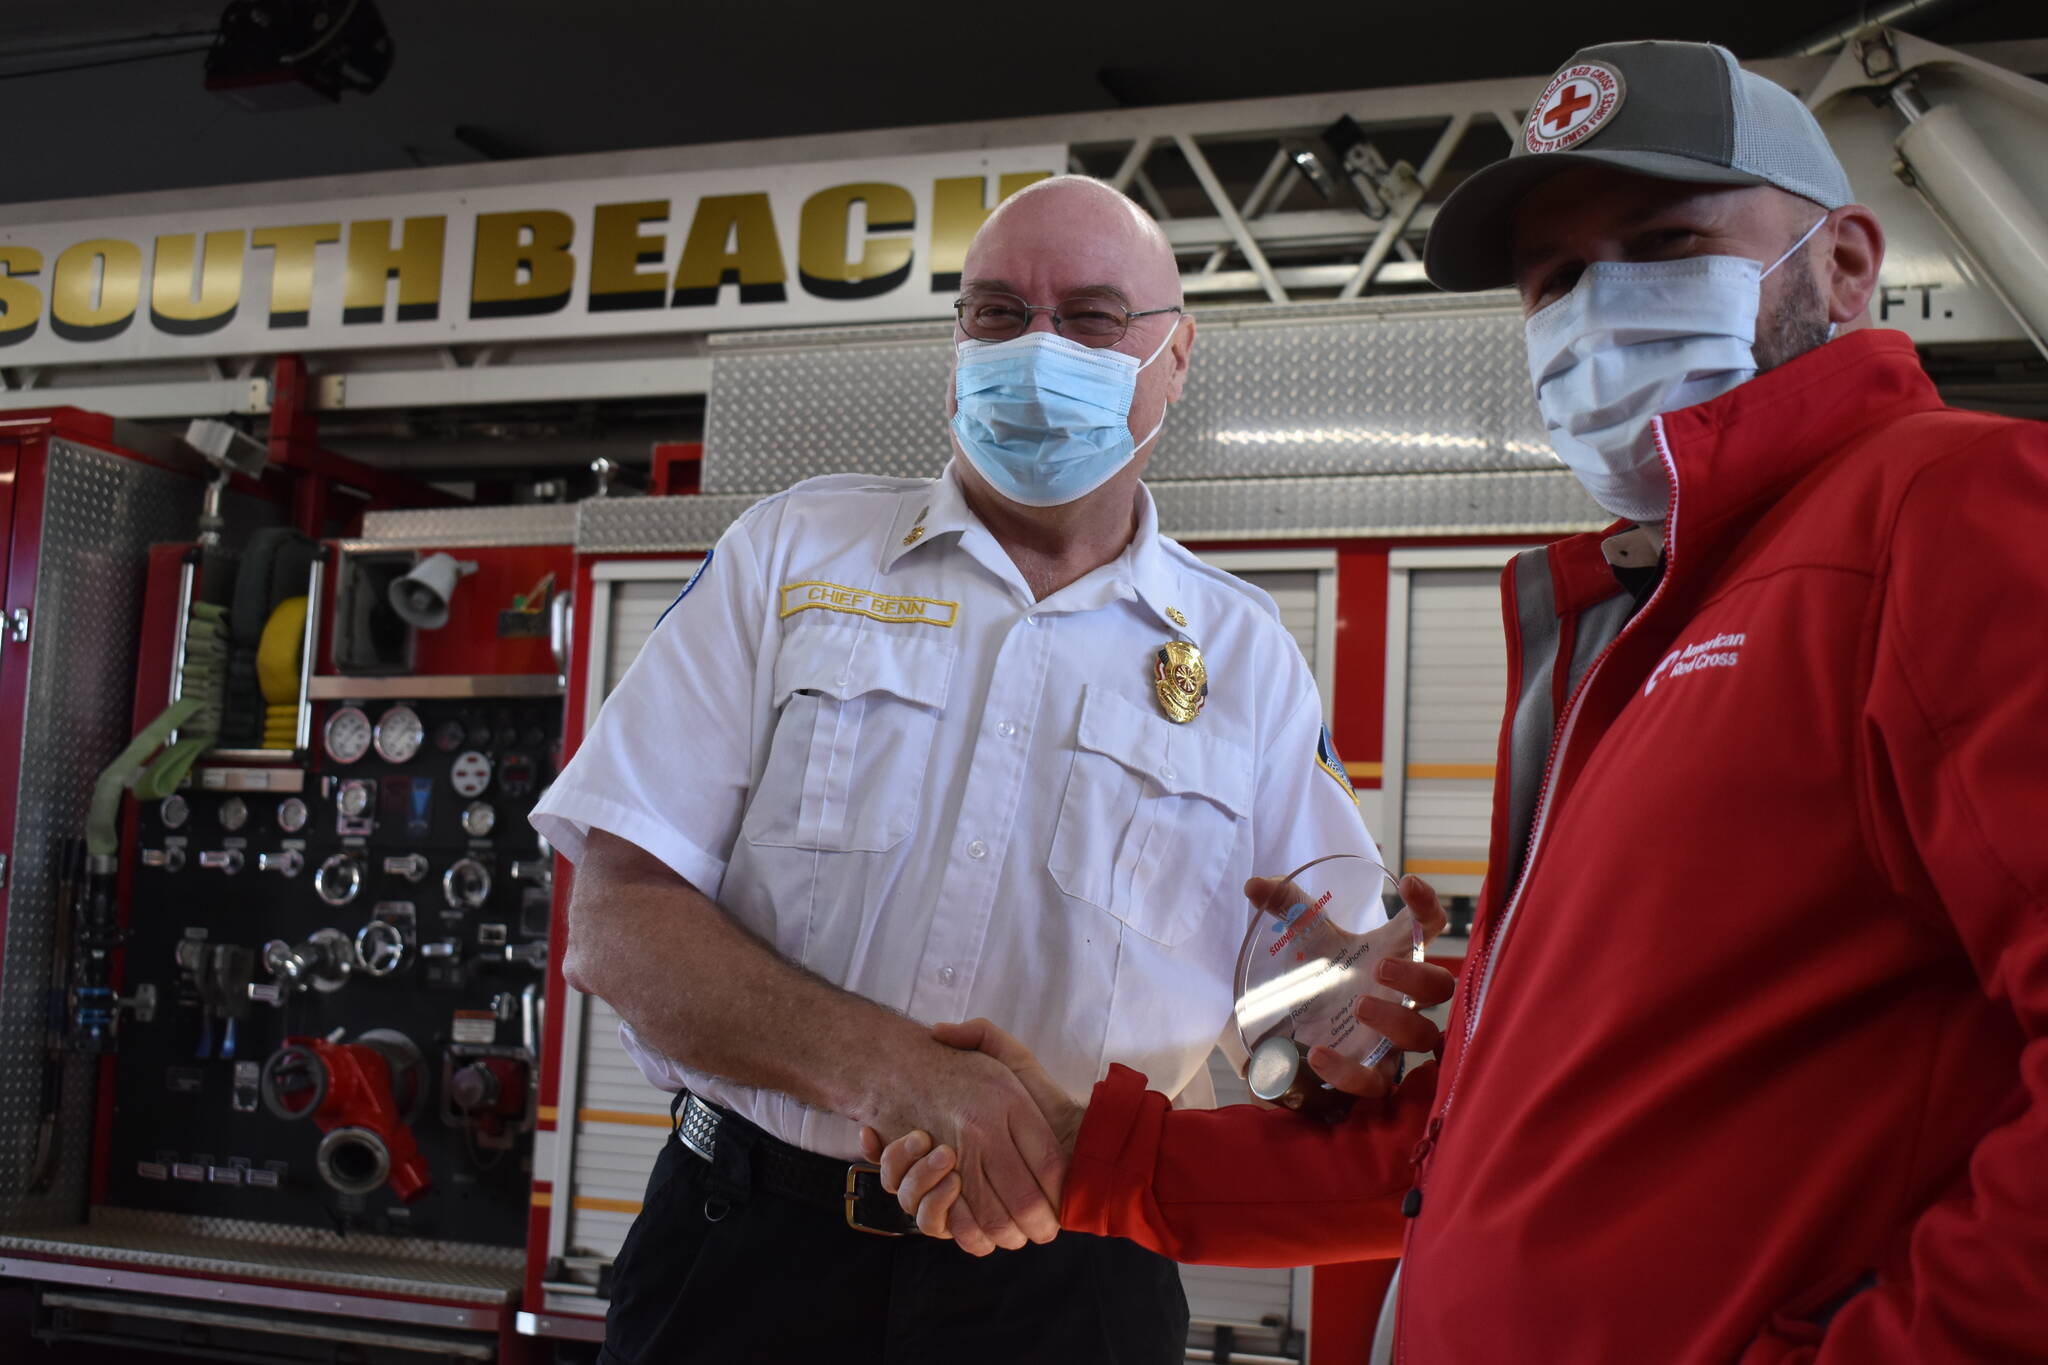 Matthew N. Wells | The Daily World 
Dennis Benn, fire chief at South Beach Regional Fire Authority, left, shakes hands with Dan Wirth, executive director of American Red Cross South Puget Sound and Olympics Chapter, after Wirth helped present Benn and his crew an award on Friday, Feb. 11, 2022, for saving the life of a family in Grayland through a joint campaign to ensure homes have working smoke alarms.